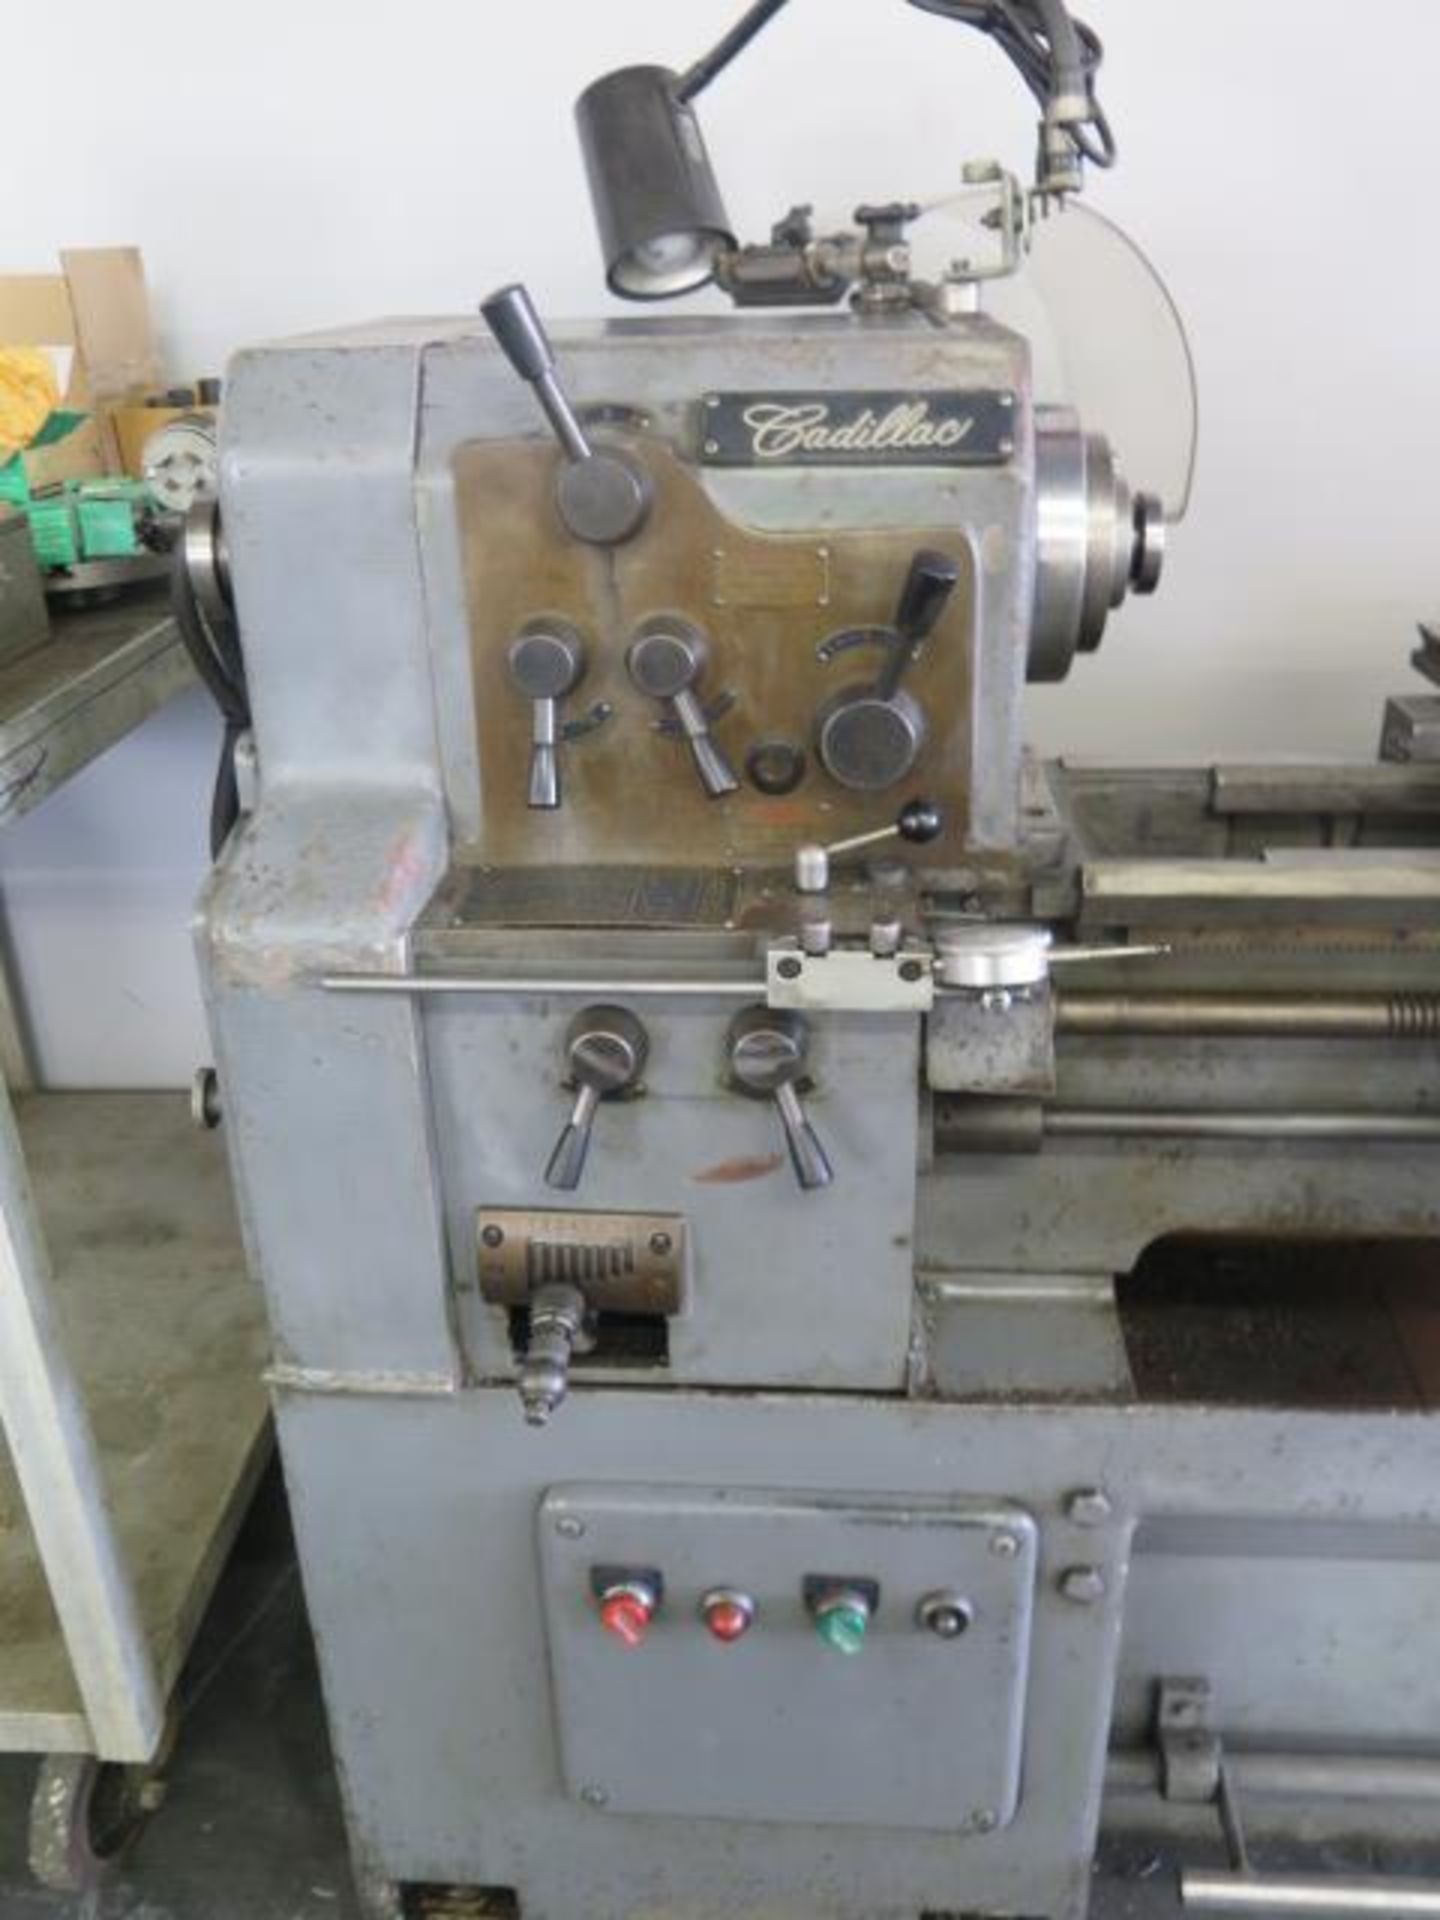 Cadillac 14" x 28" Geared Lathe w/ 83-1800 RPM, Inch Threading, Tailstock, Steady Rest, SOLD AS IS - Image 3 of 10